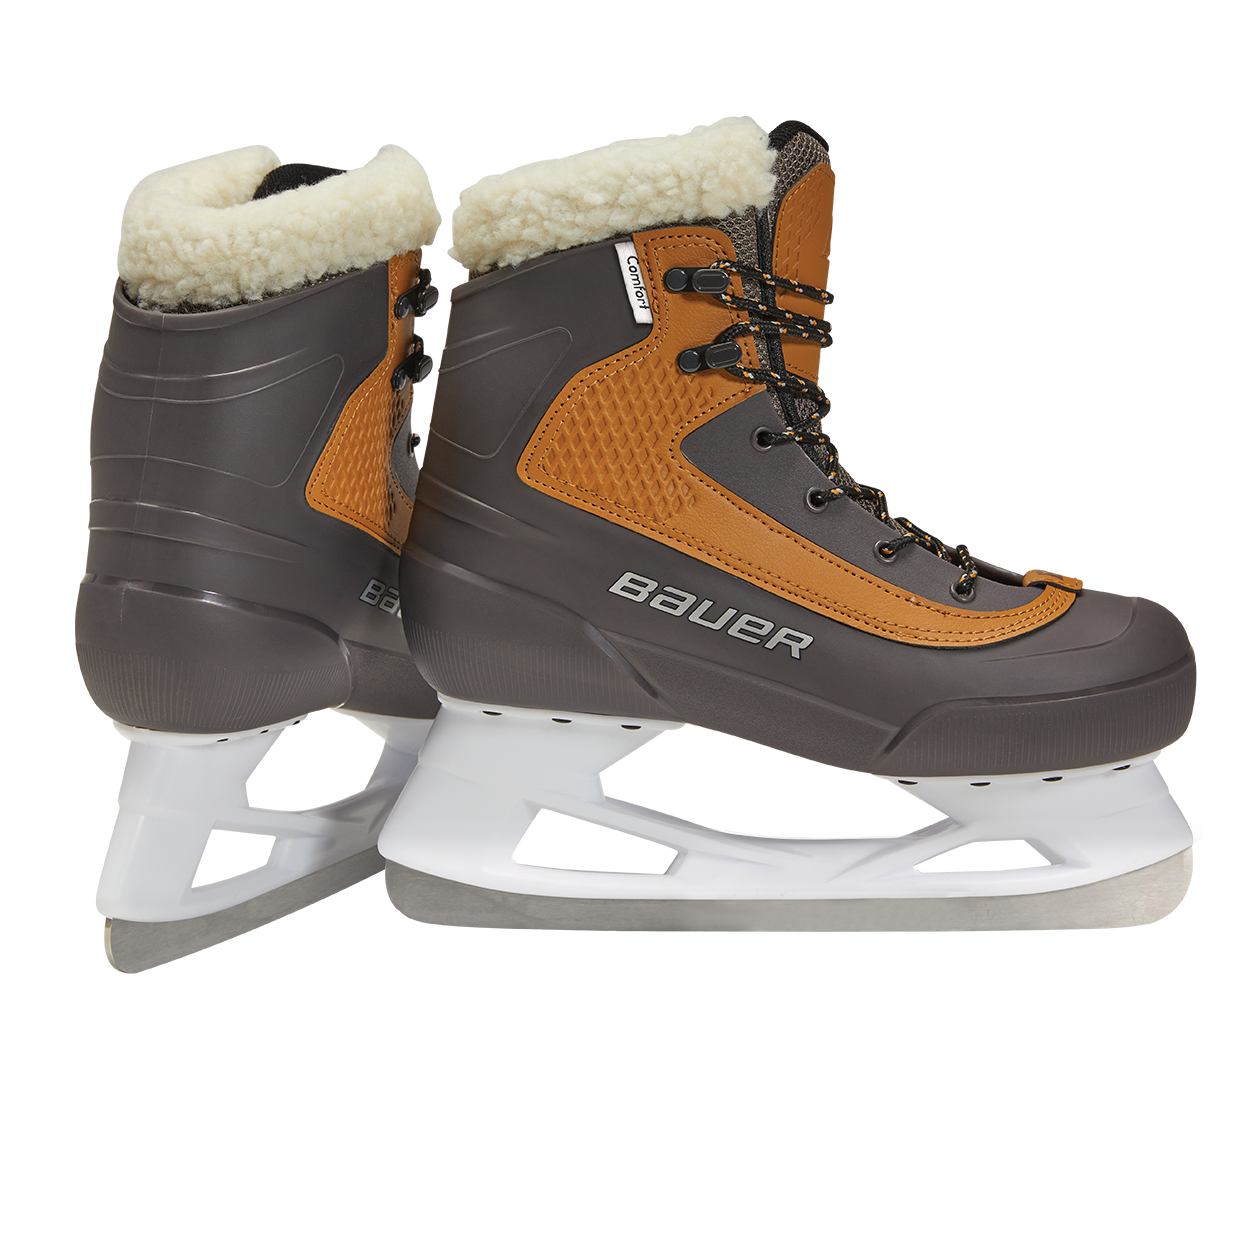 BAUER WHISTLER Lifestyle Patins à glace Unisexe